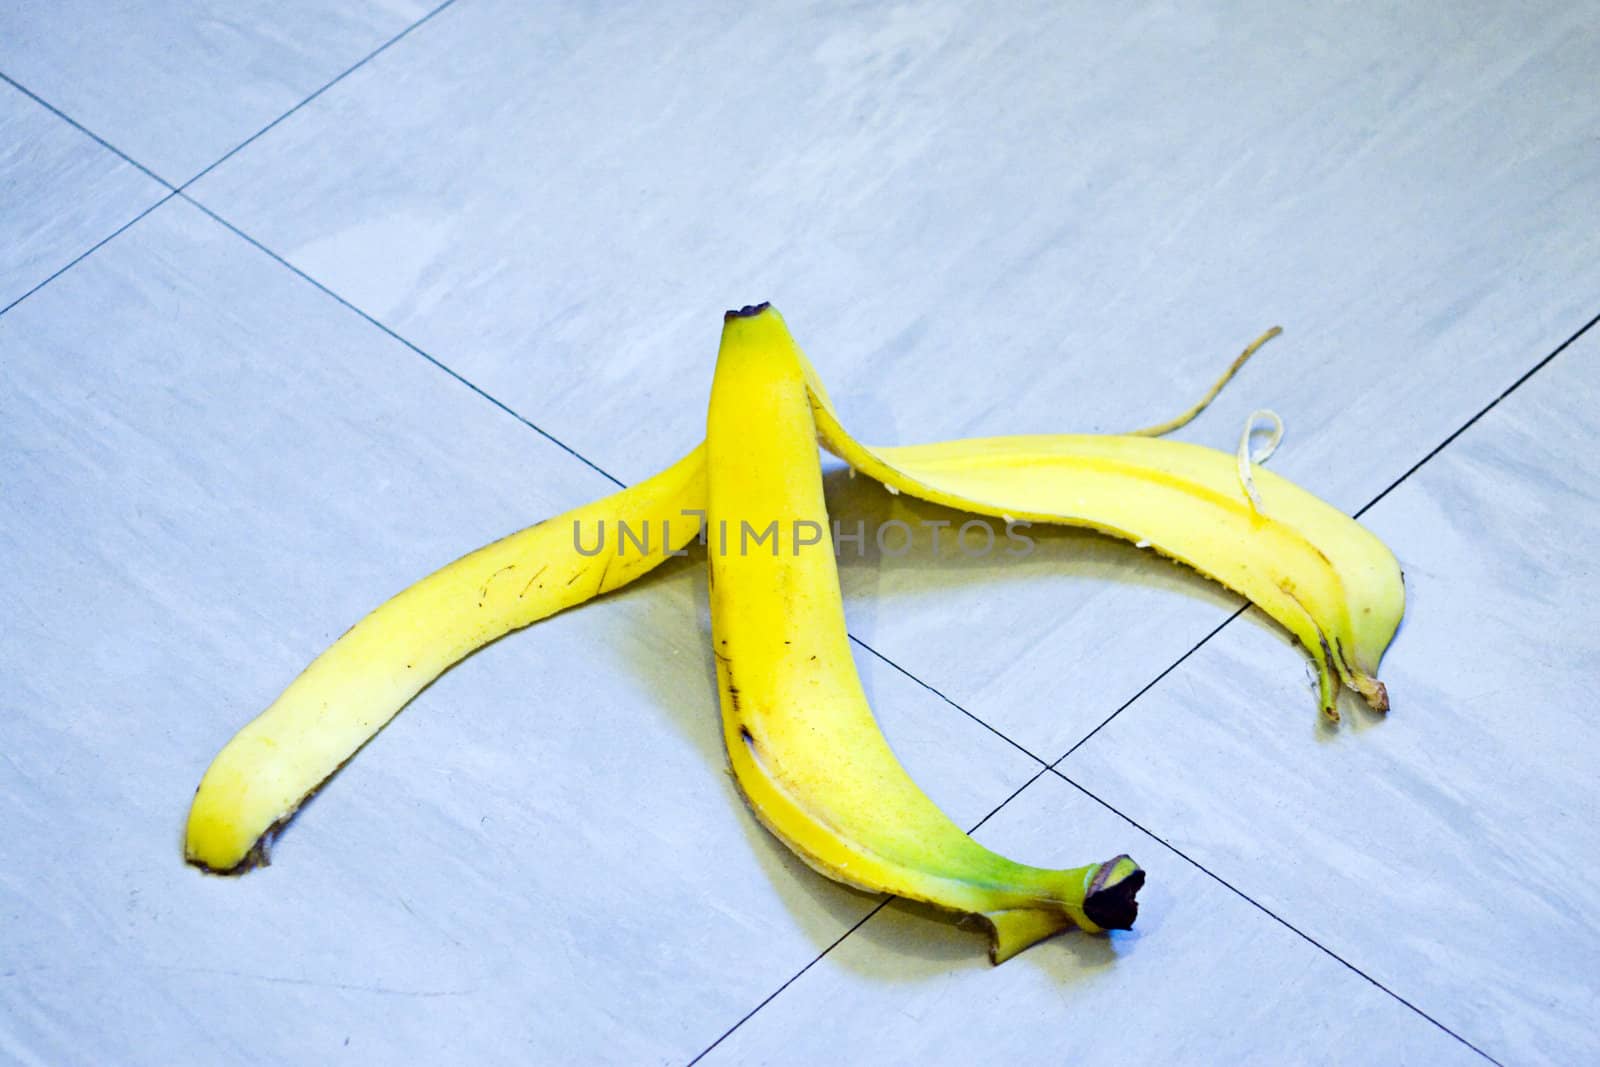 A banana skin lying on a tile floor ready for someone to slip